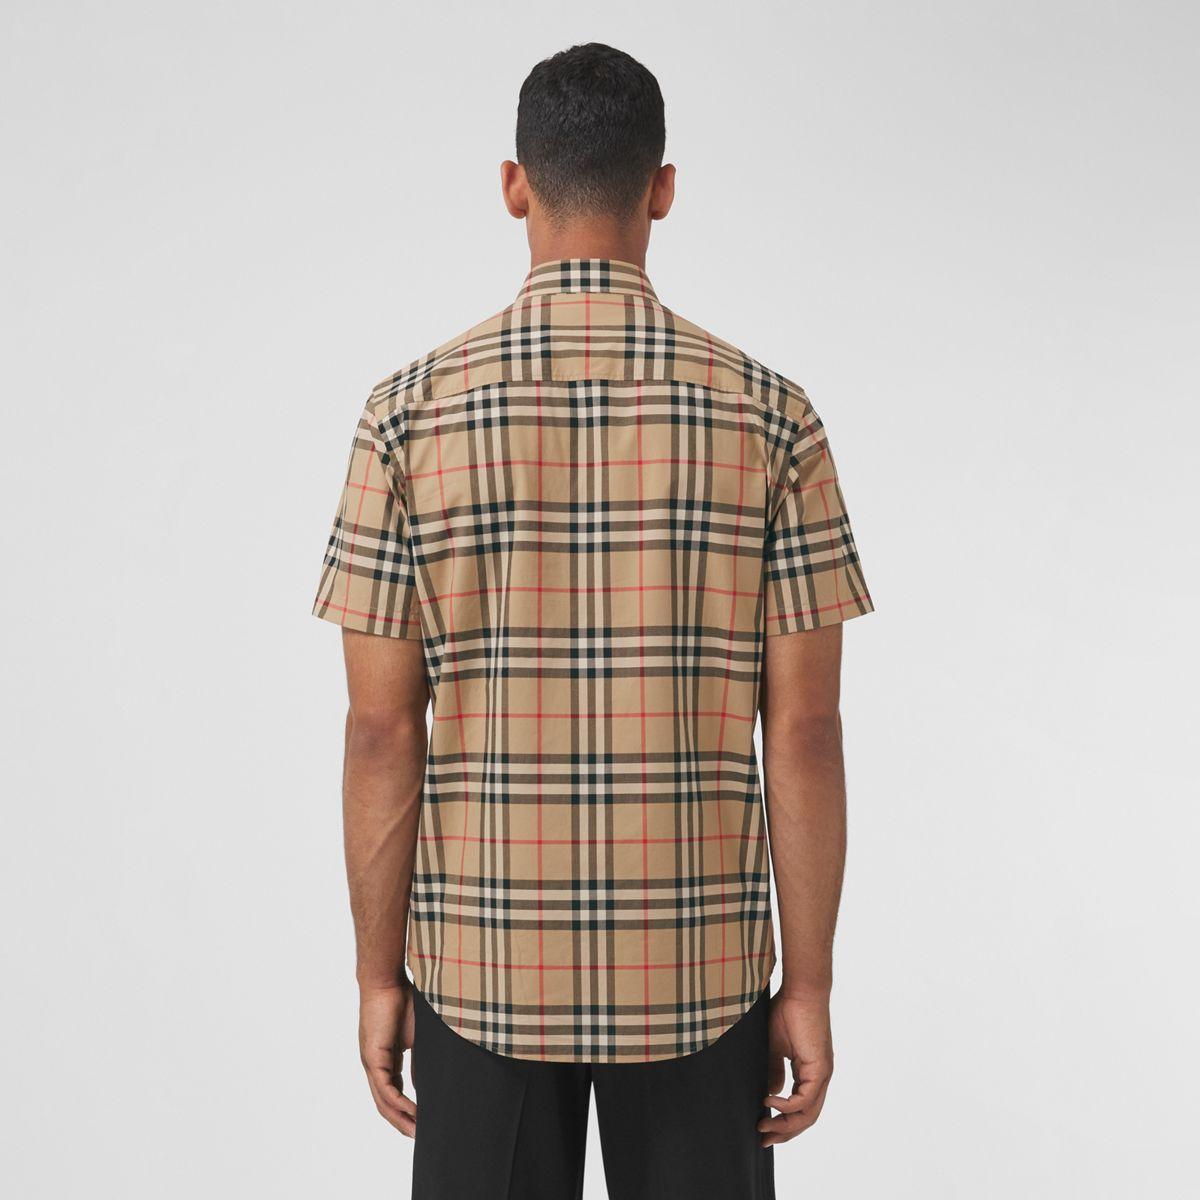 Burberry Cotton Vintage Check Woven Shirt in Beige,Black,Red (Brown) for  Men - Save 38% | Lyst